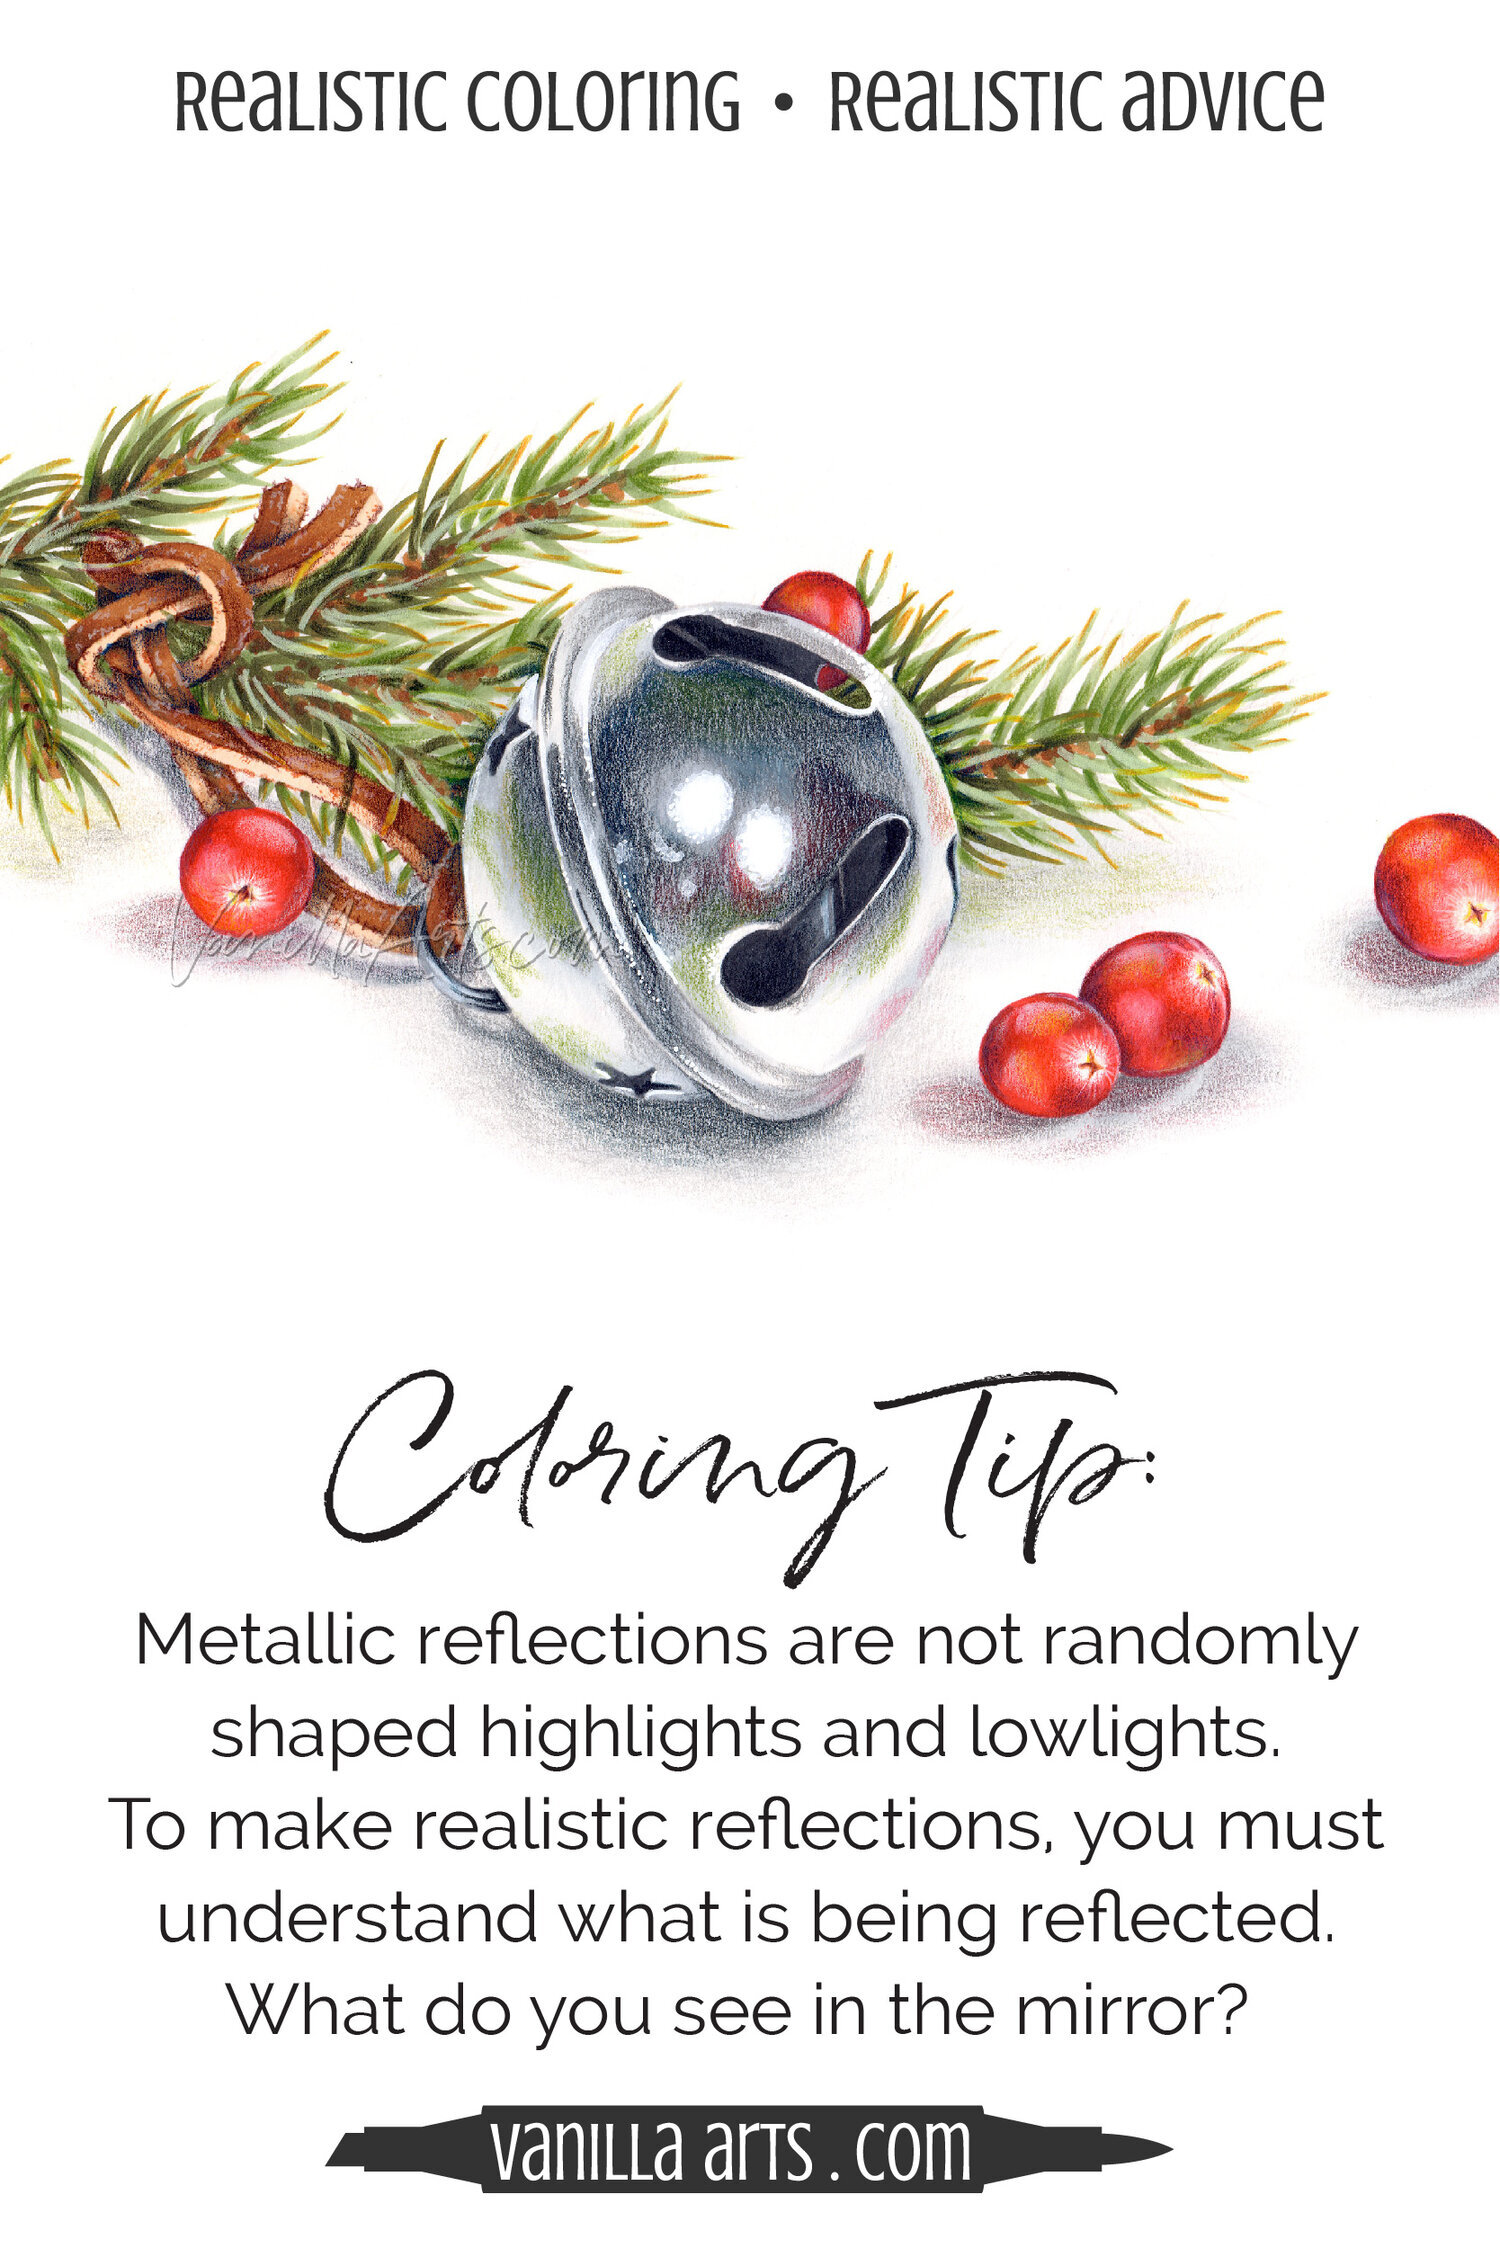  Coloring Tip: Reflections are not highlights! Add realism to Copic Marker and colored pencil projects, rendering lifelike mirror reflections on metal, glass, and other shiny surfaces. | VanillaArts.com | #coloredpencil #copic #howtocolor 